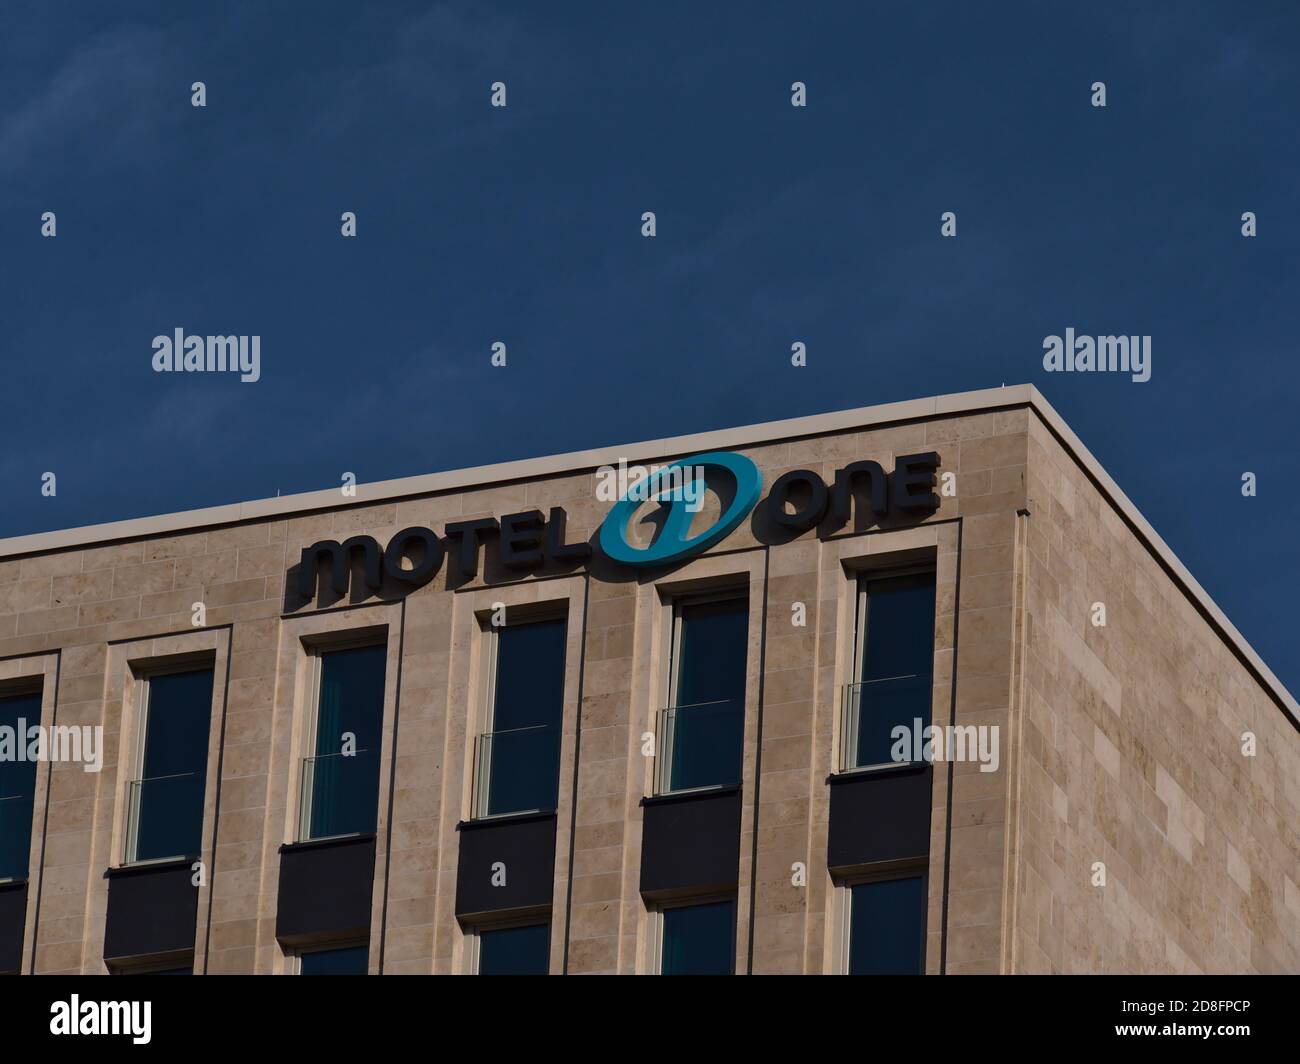 Freiburg, Baden-Wuerttemberg, Germany - 10/25/2020: Logo of budget design hotel chain Motel One (more than 70 hotels) on the top of new building. Stock Photo